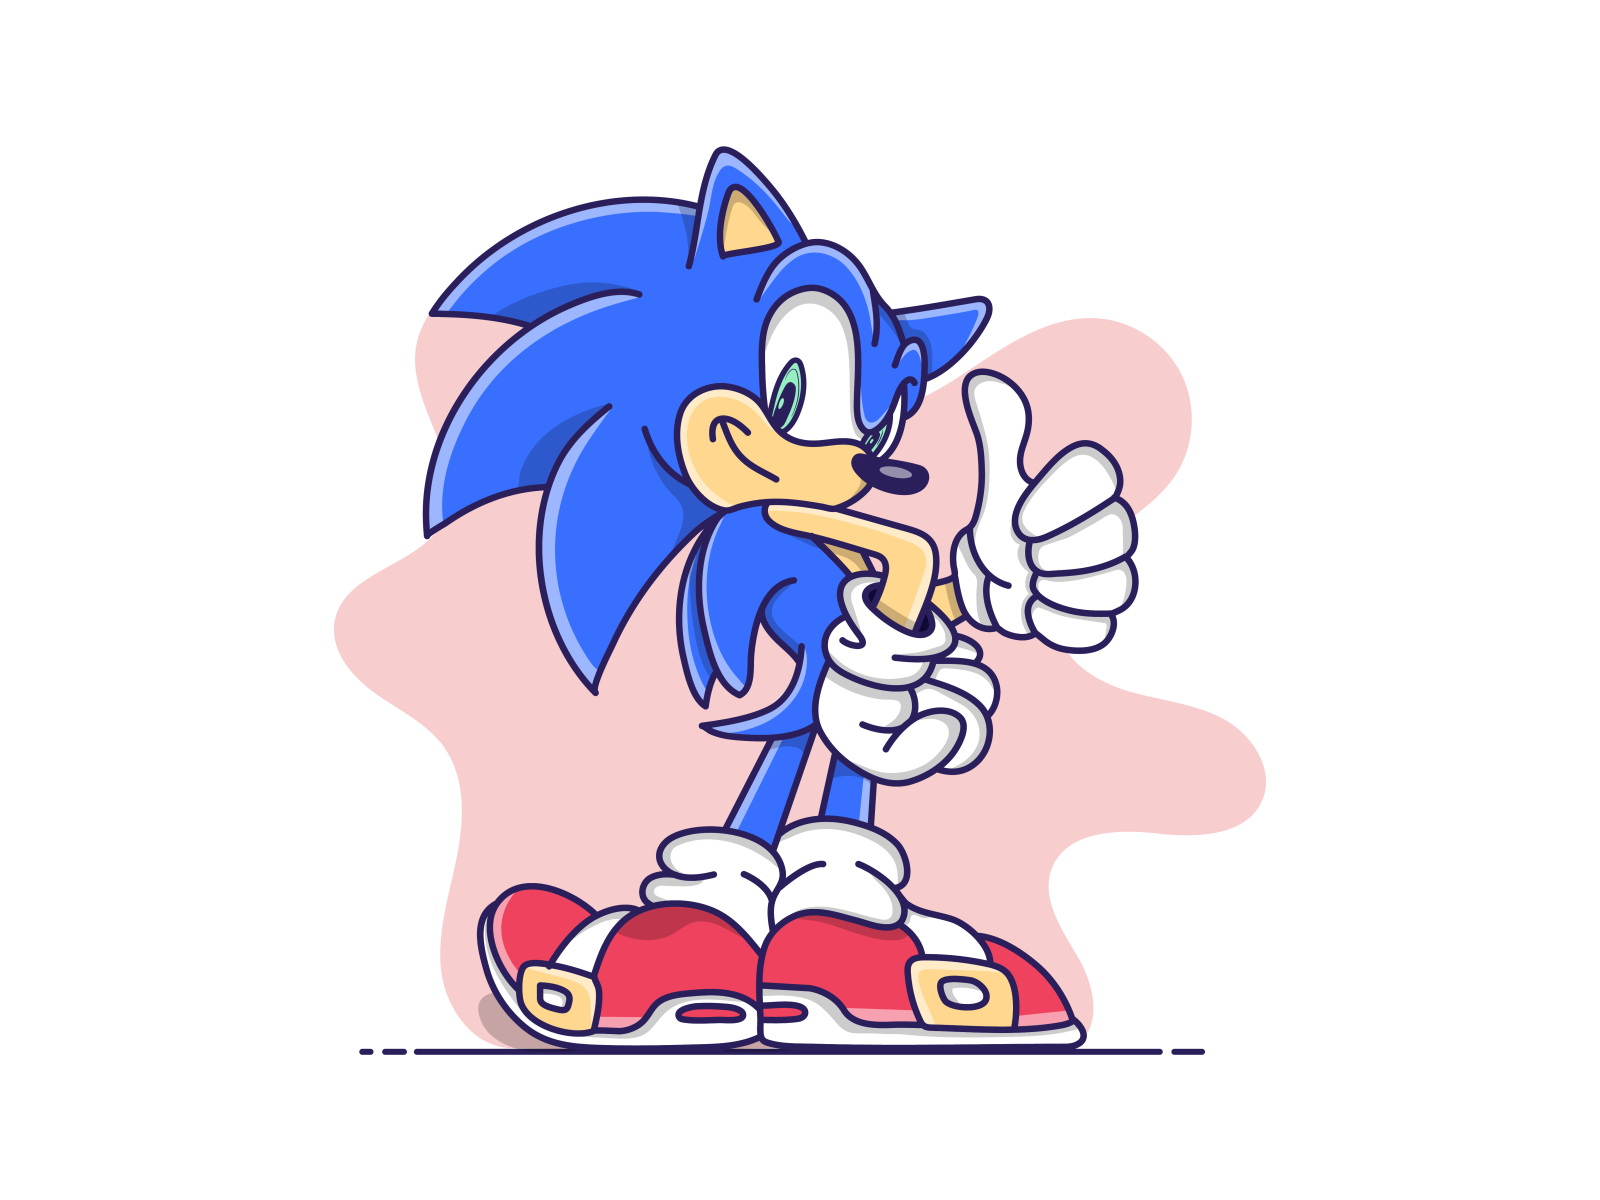 Pure Vector Sonic Illustration and Colouring by DarkoDesign on Dribbble